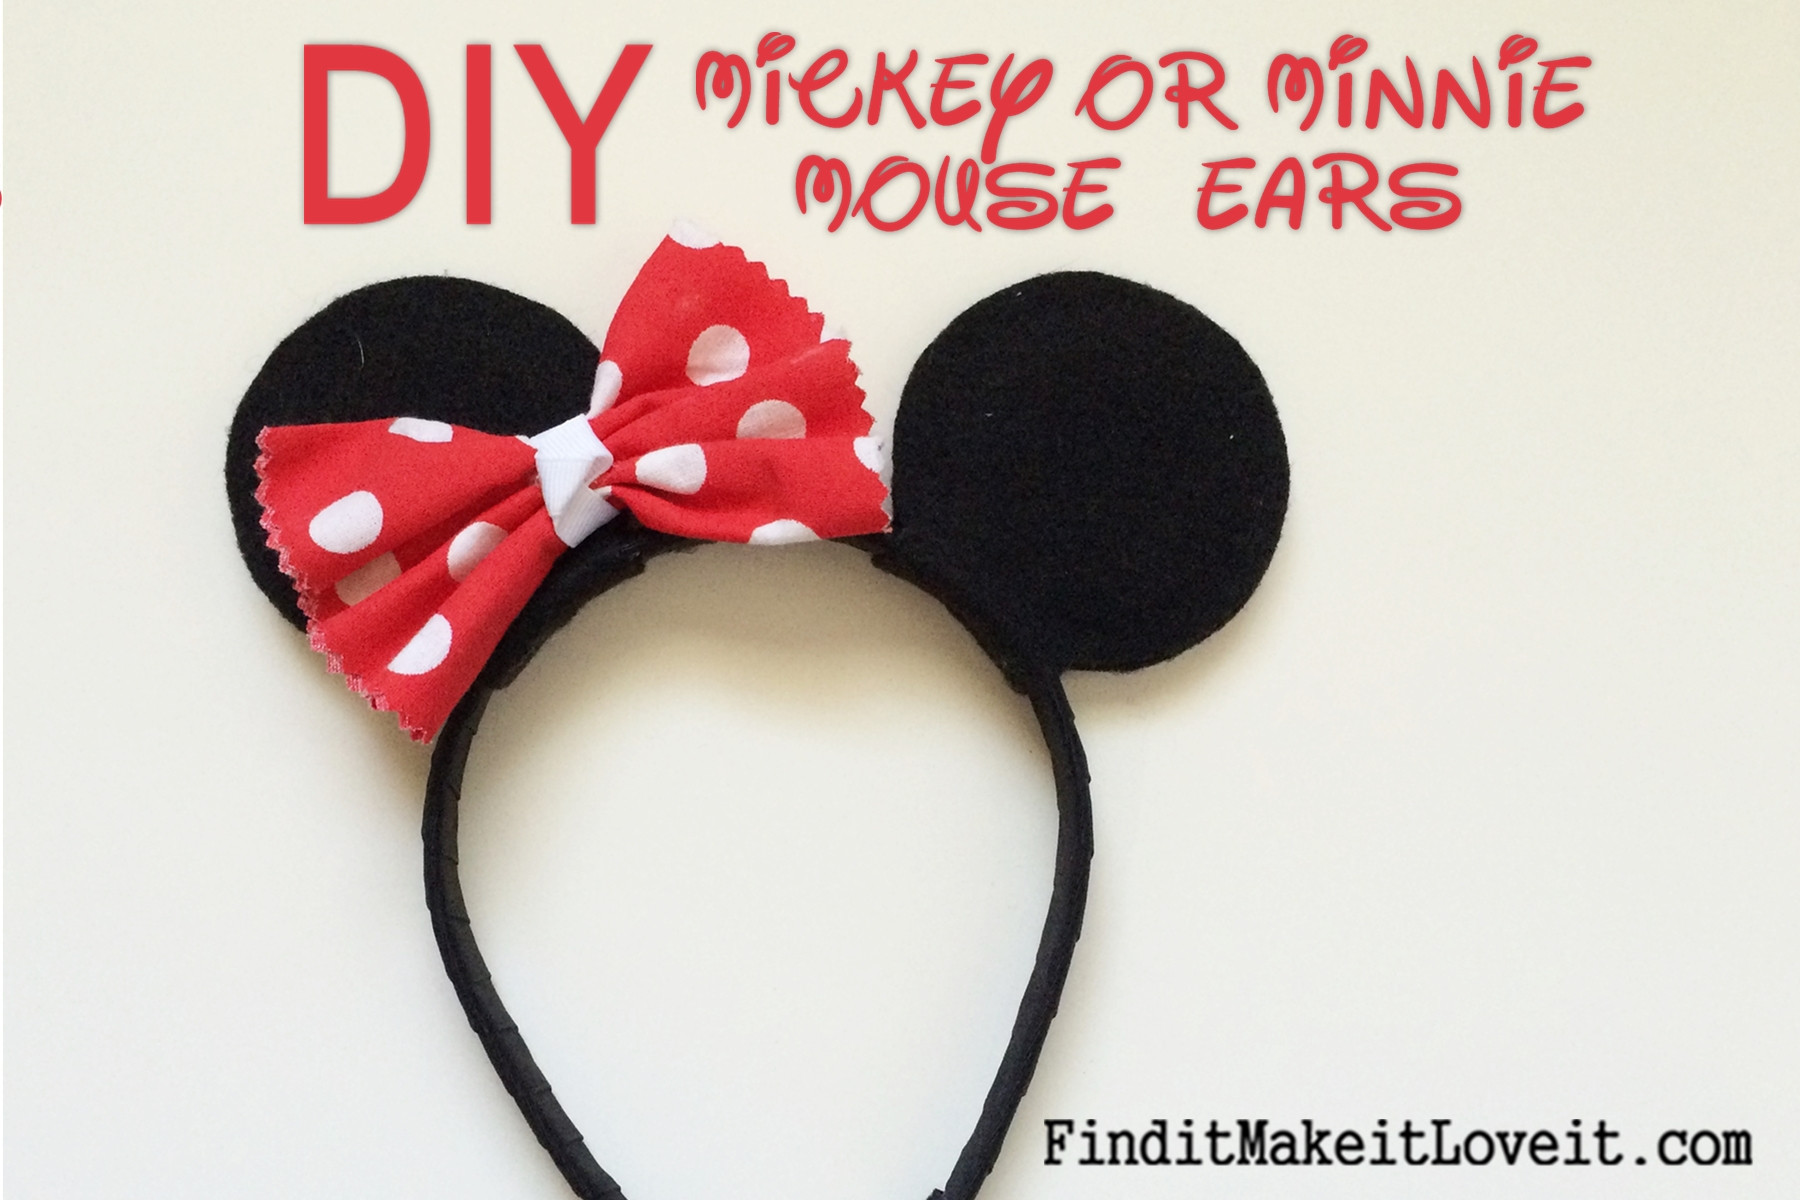 Best ideas about DIY Mouse Ears
. Save or Pin DIY Mickey or Minnie Mouse Ears Find it Make it Love it Now.